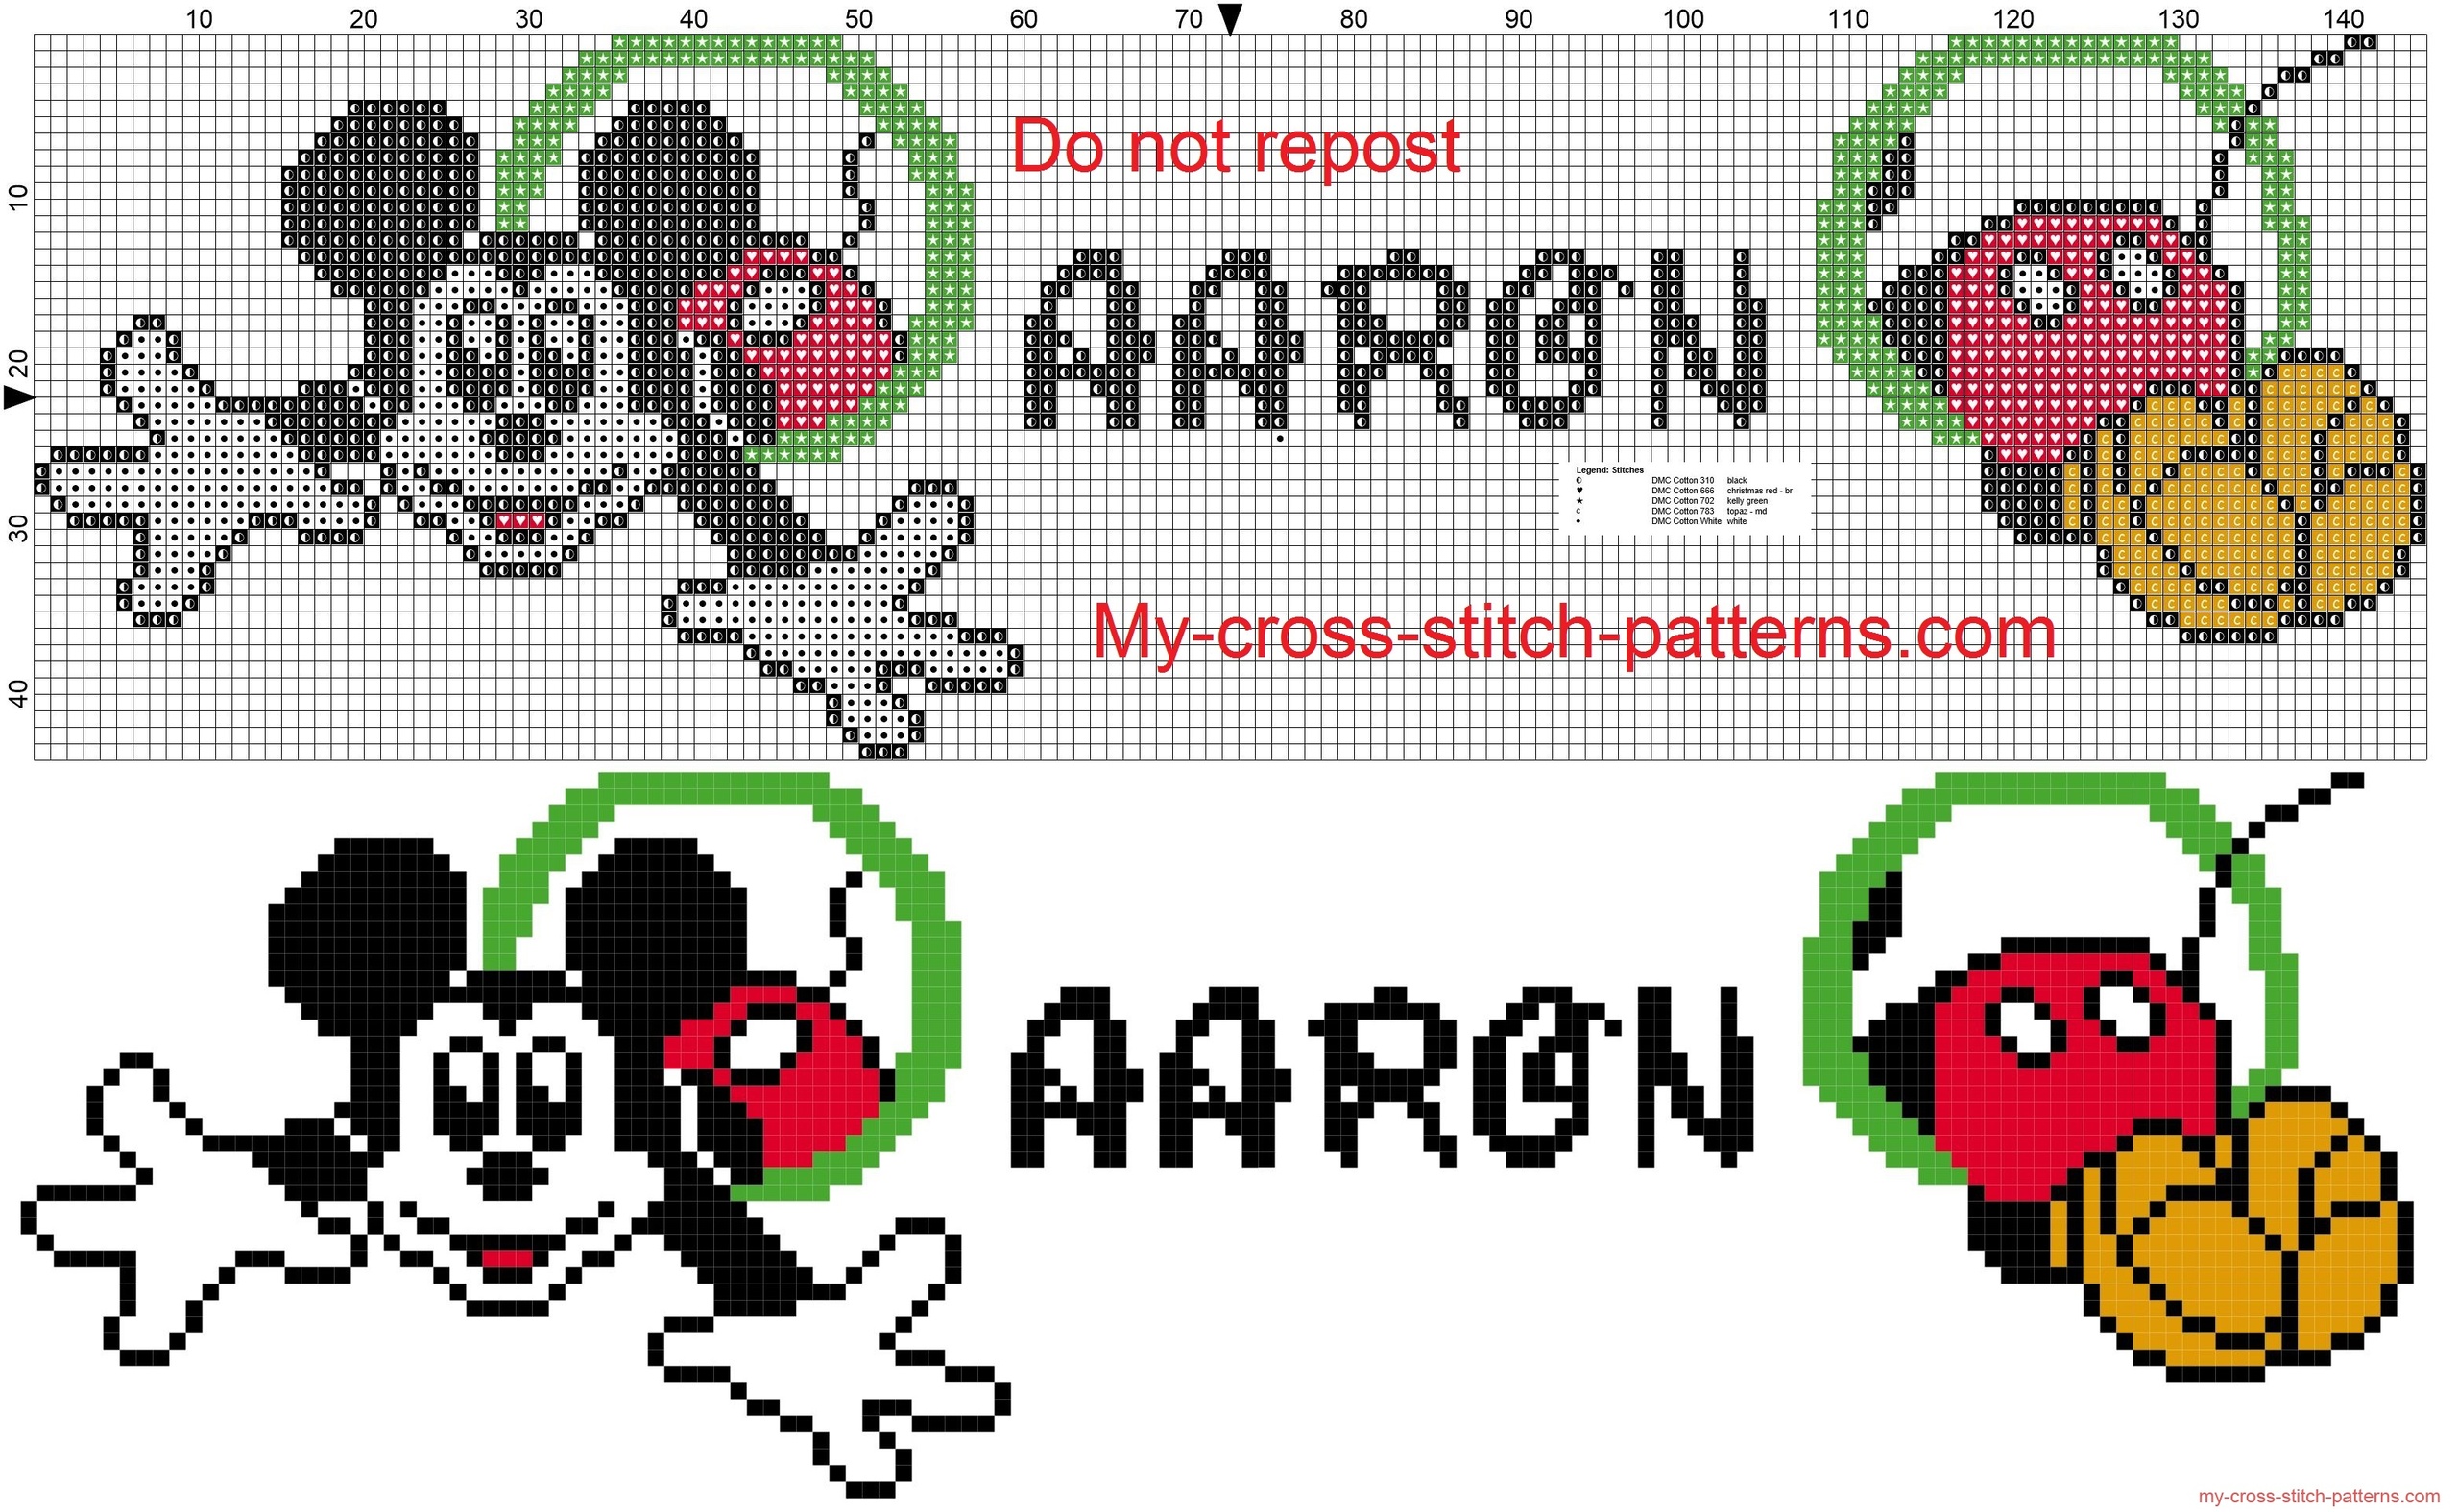 aaron_name_whit_mickey_mouse_cross_stitch_patterns_free